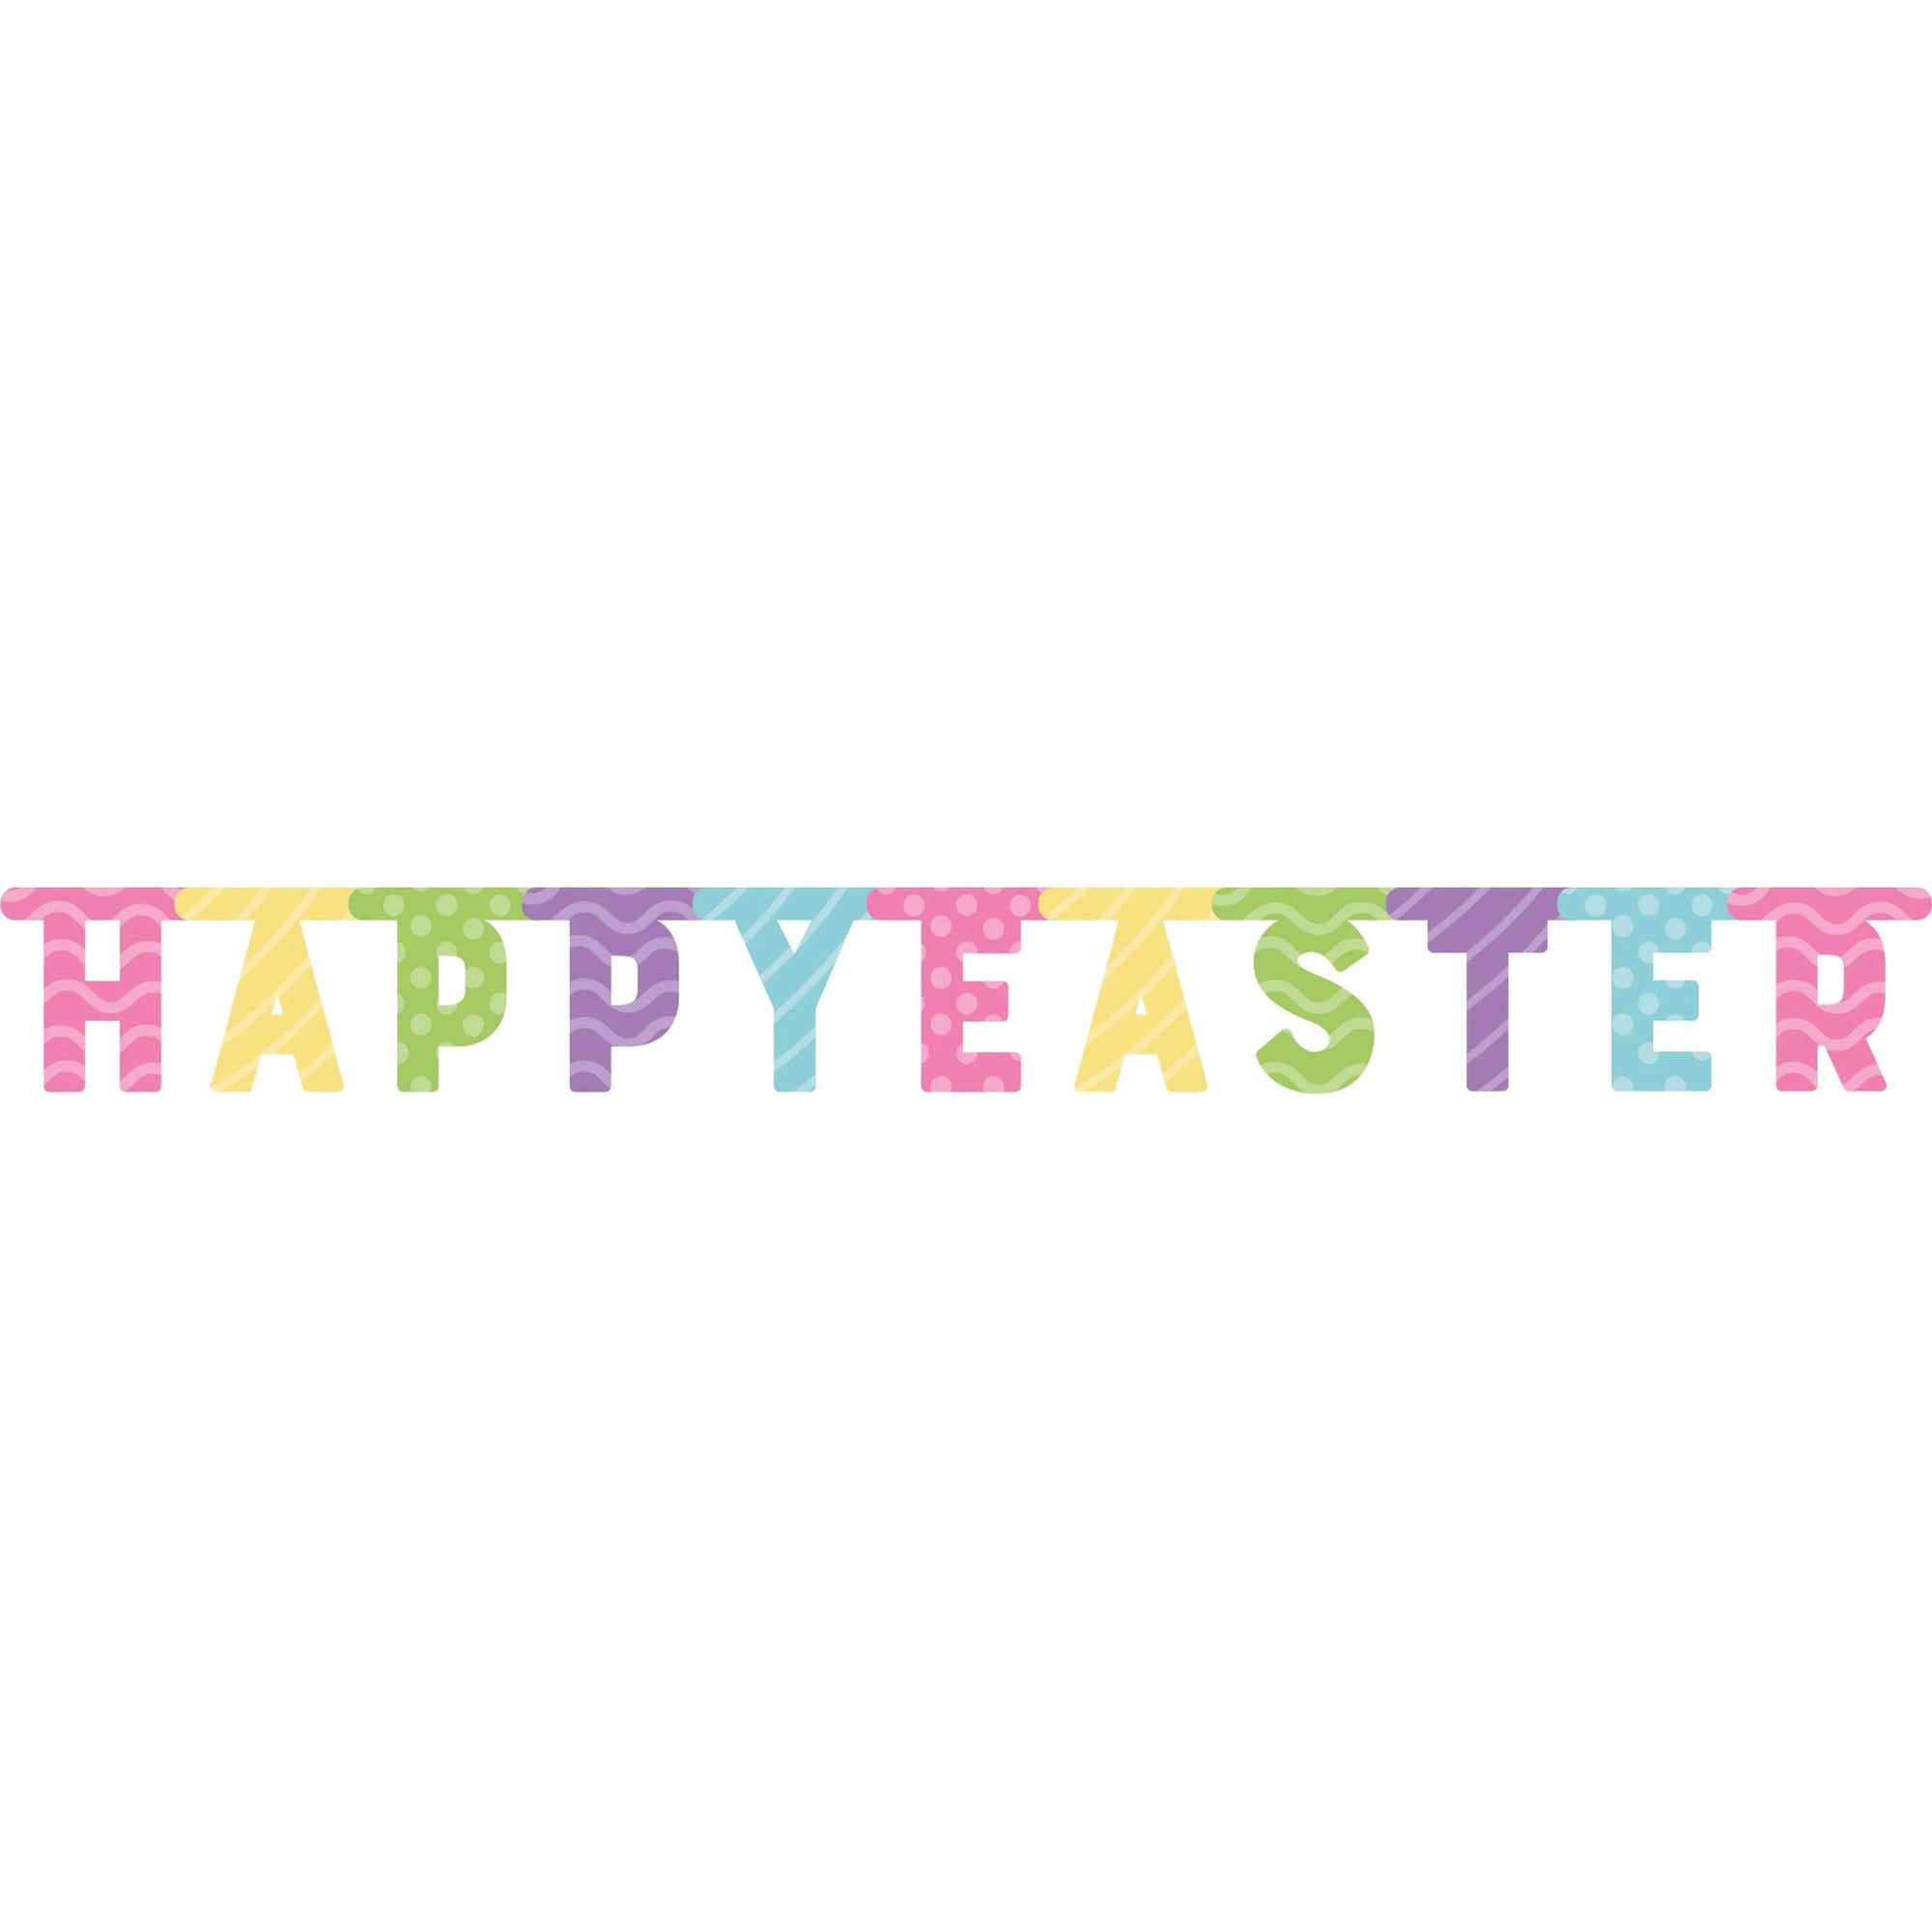 Bulk Case of "Happy Easter" Jointed Banner